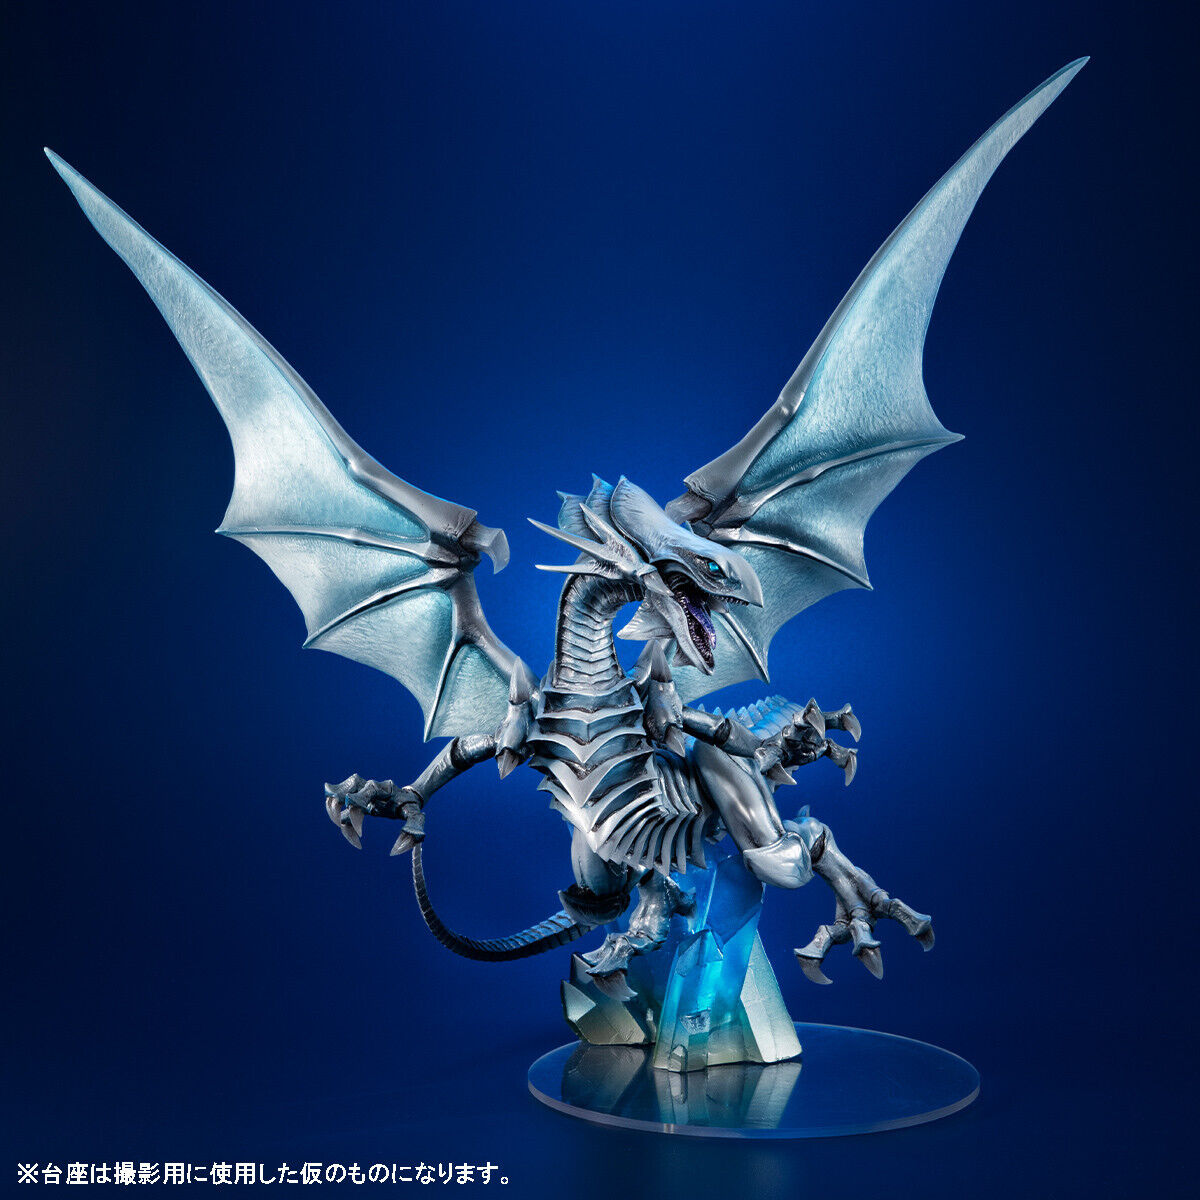 Yugioh Blue Eyes White Dragon Duel Monsters Holographic Edition Megahouse Figure